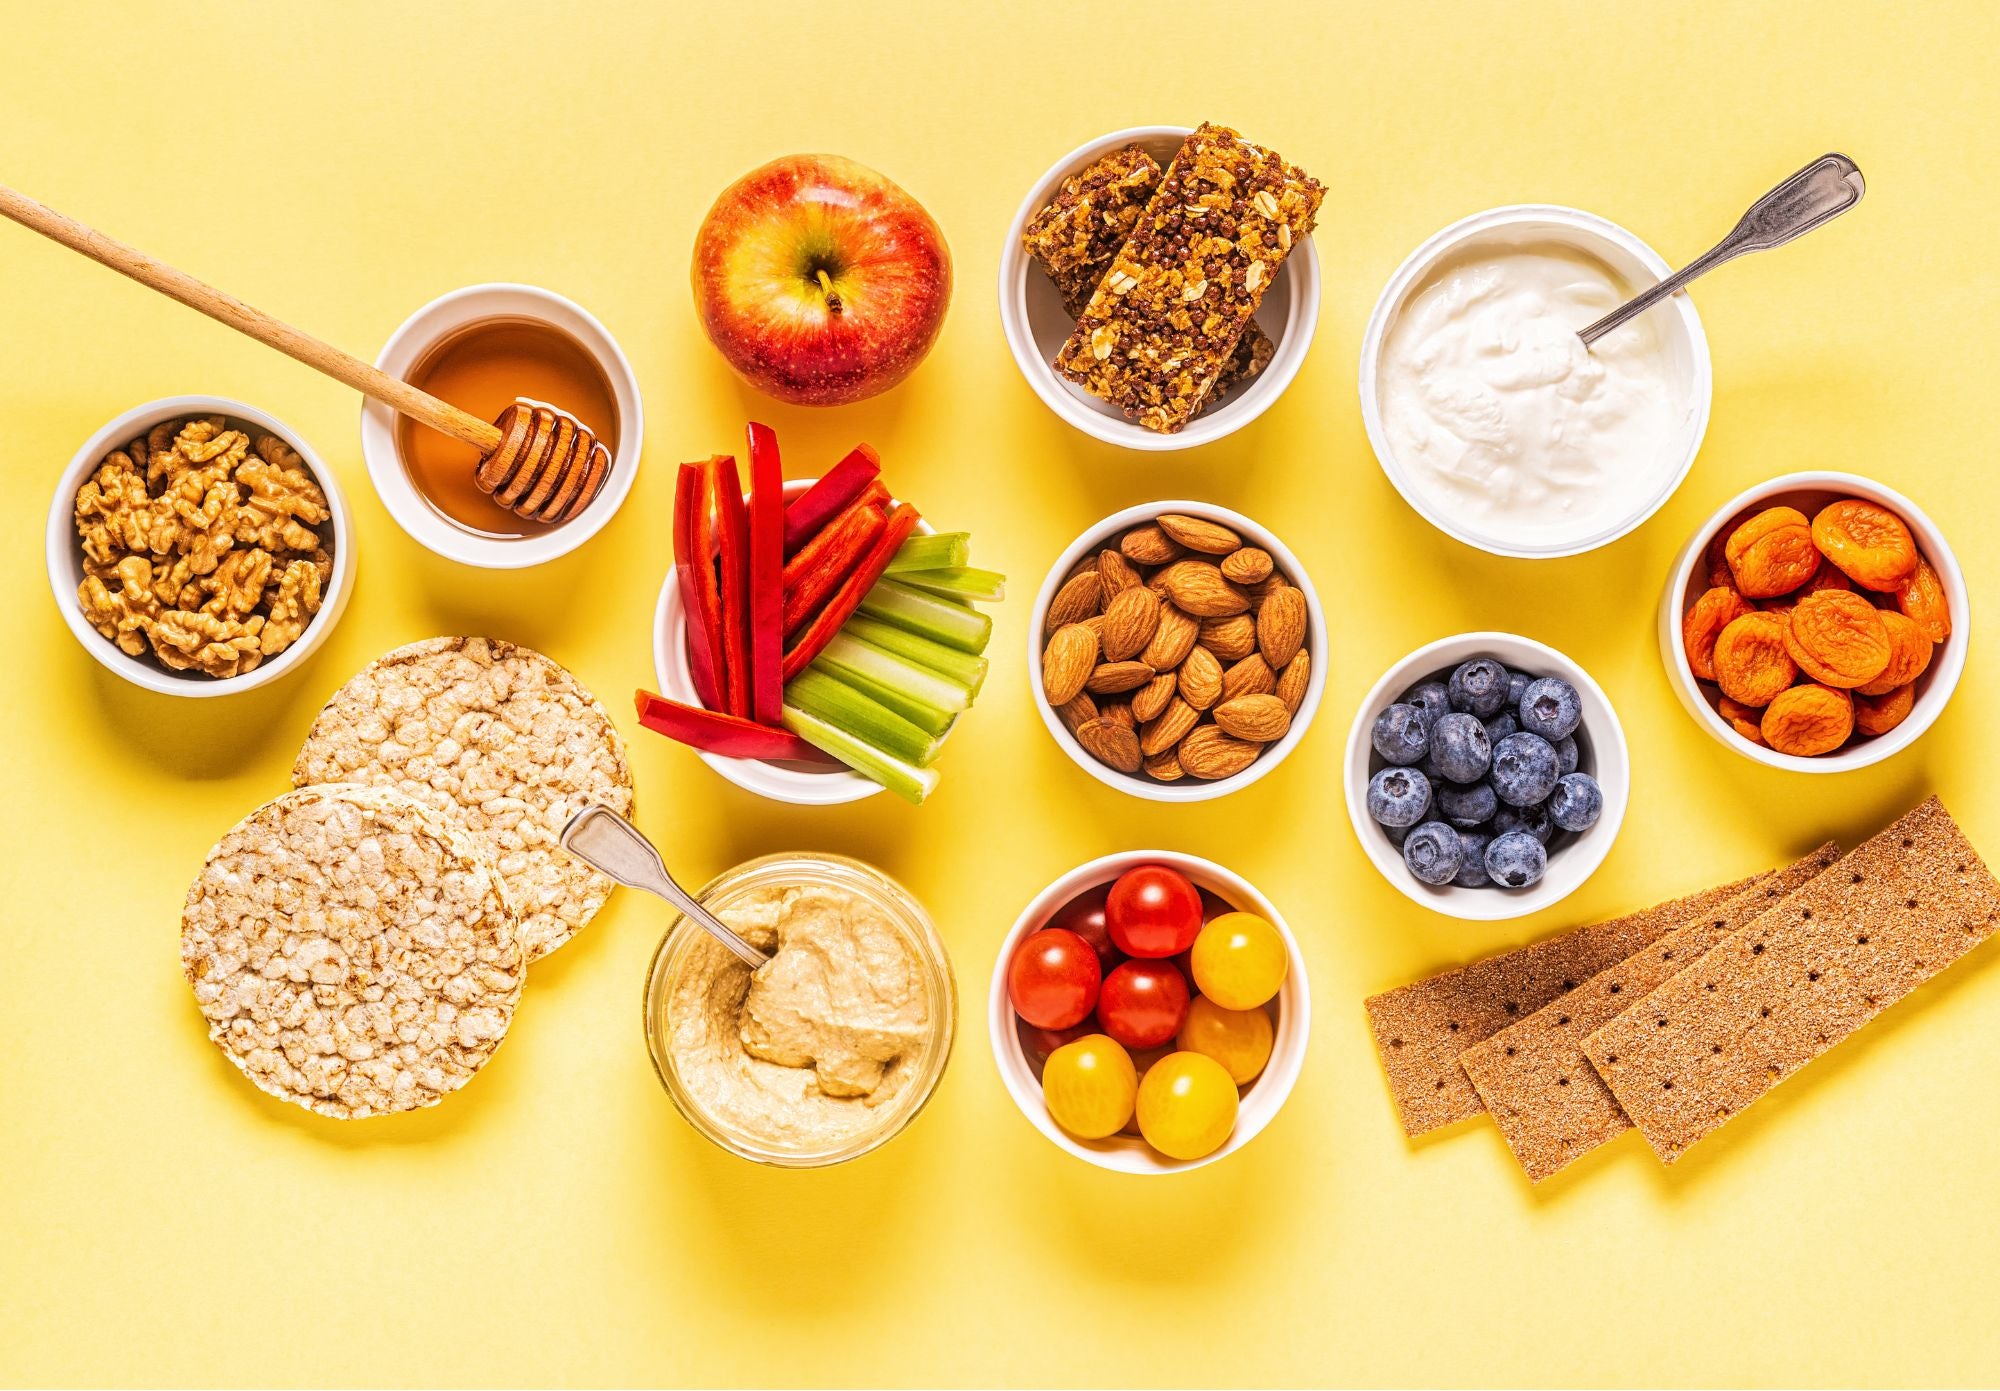 Healthy Snacking: Satisfying Cravings Without Compromising Nutrition